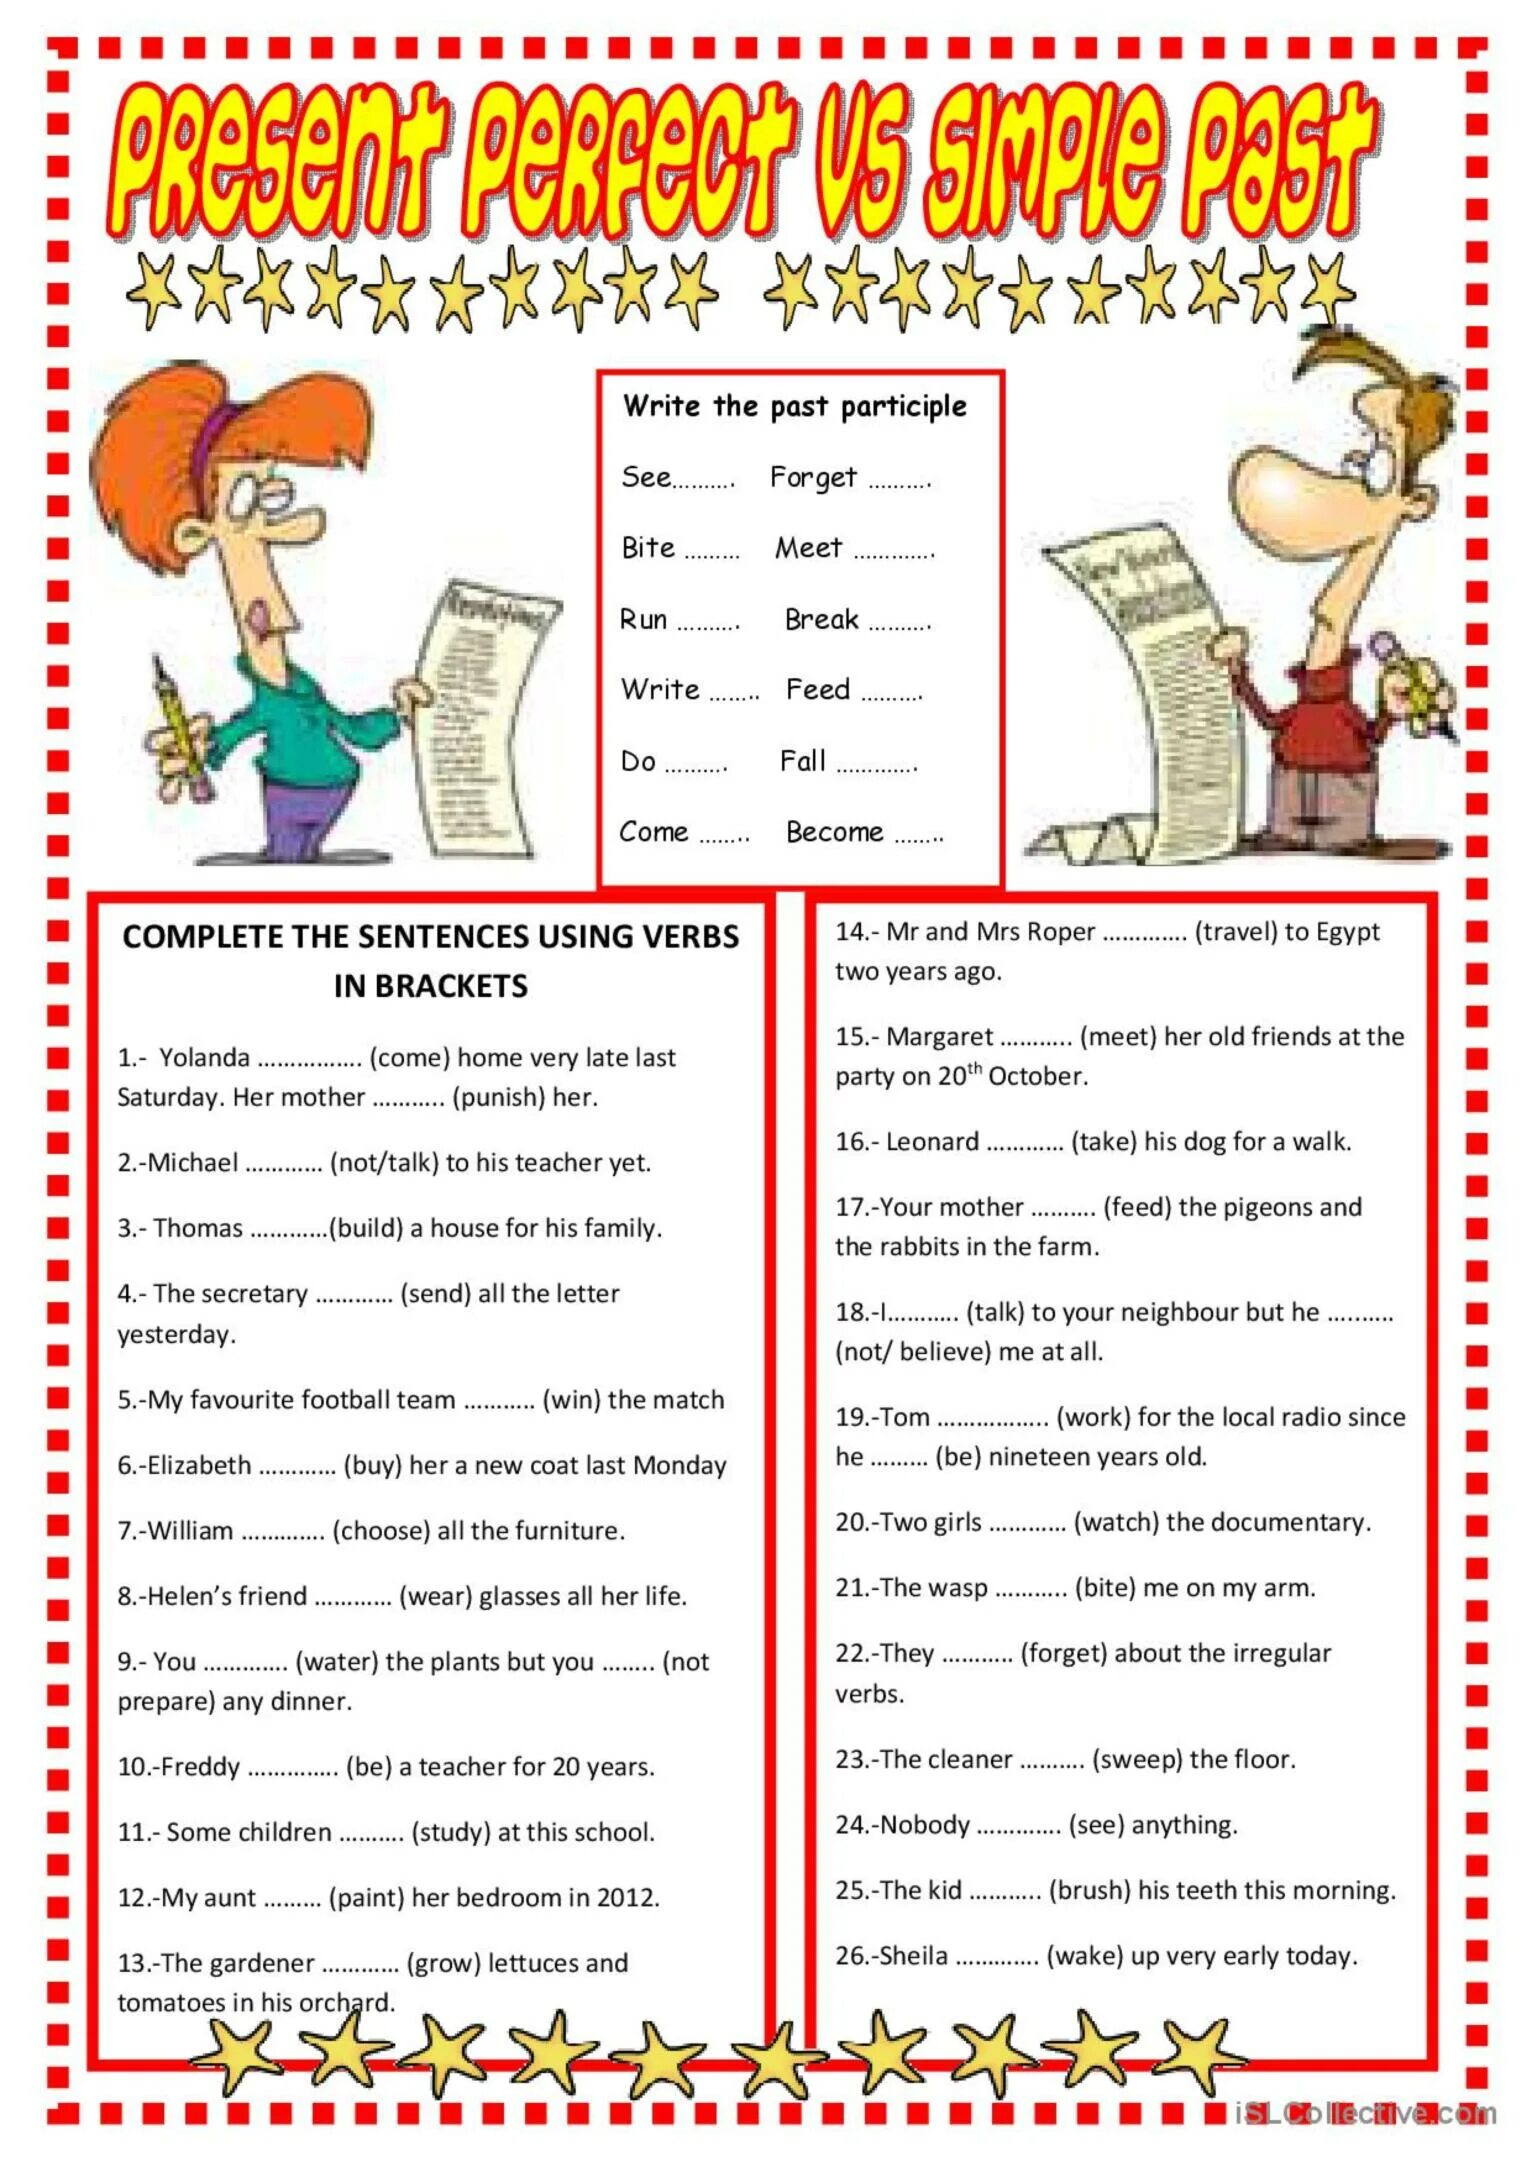 Past simple or present perfect exercises. Present perfect versus past simple Worksheet. Present perfect or past simple Worksheets. Present perfect past simple for Kids. Present perfect vs past simple Worksheets.